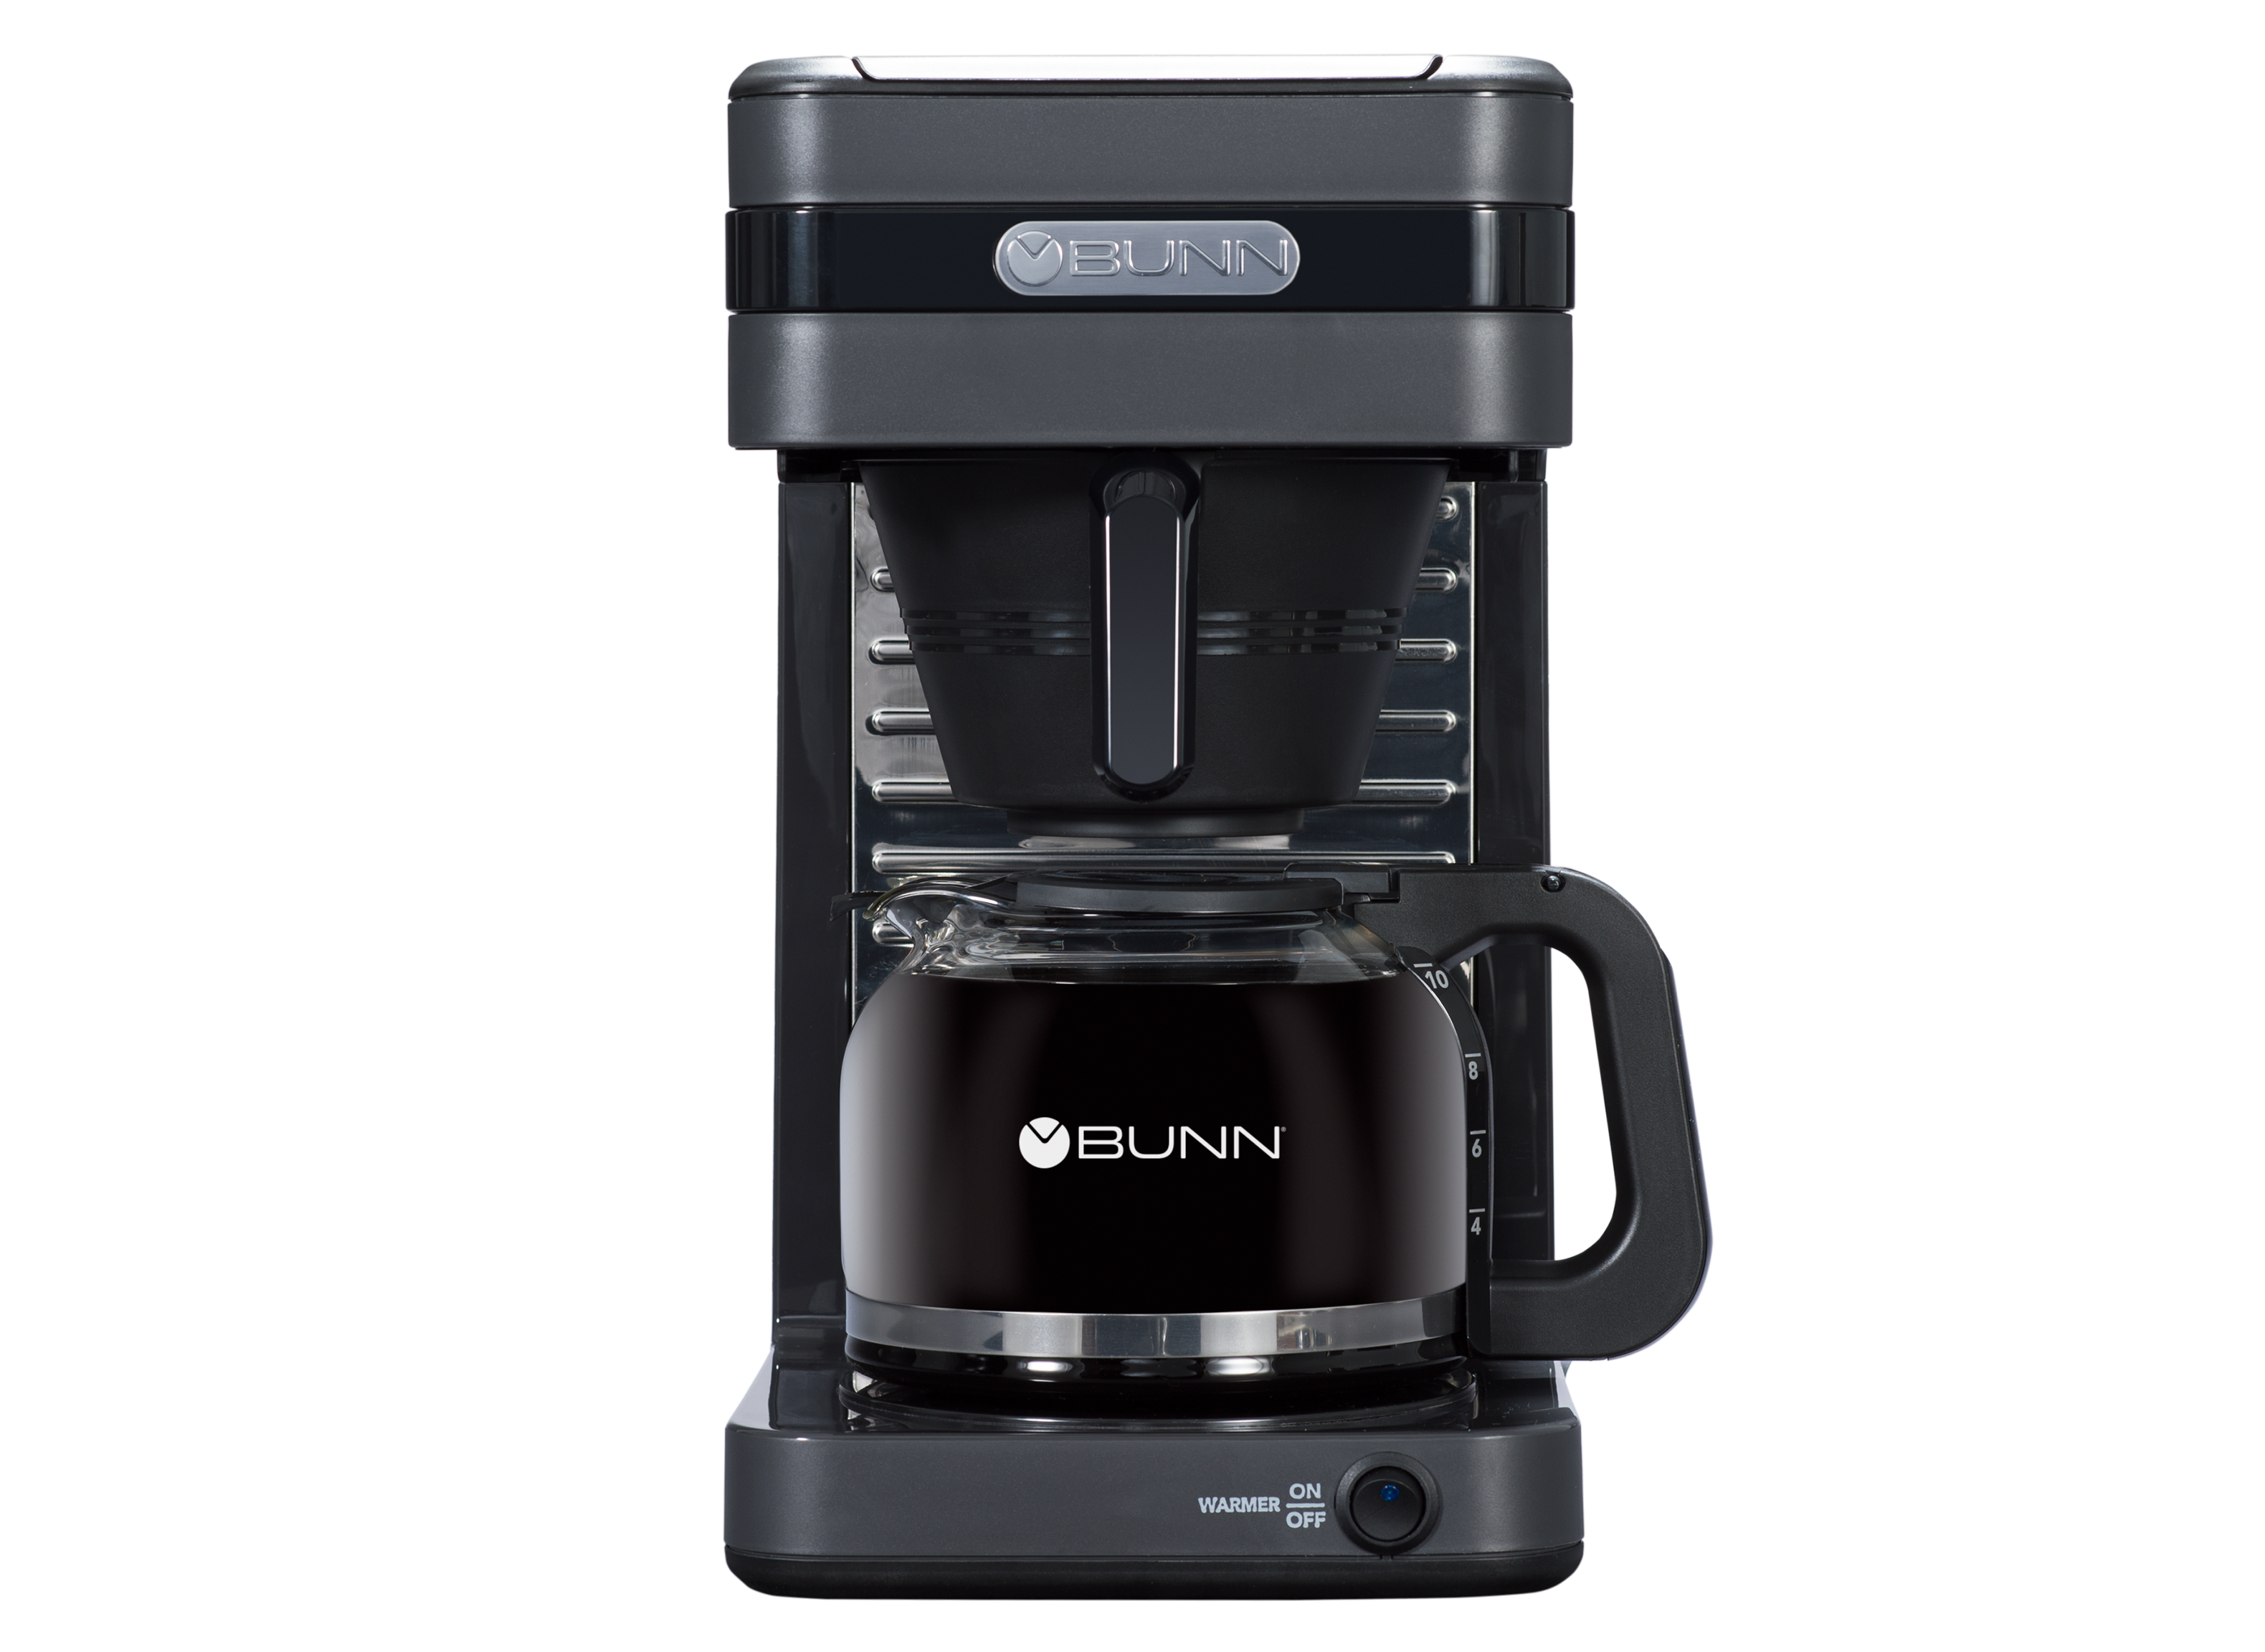 https://crdms.images.consumerreports.org/prod/products/cr/models/395402-drip-coffee-makers-with-carafe-bunn-speed-brew-elite-grey-csb2g-61741.png